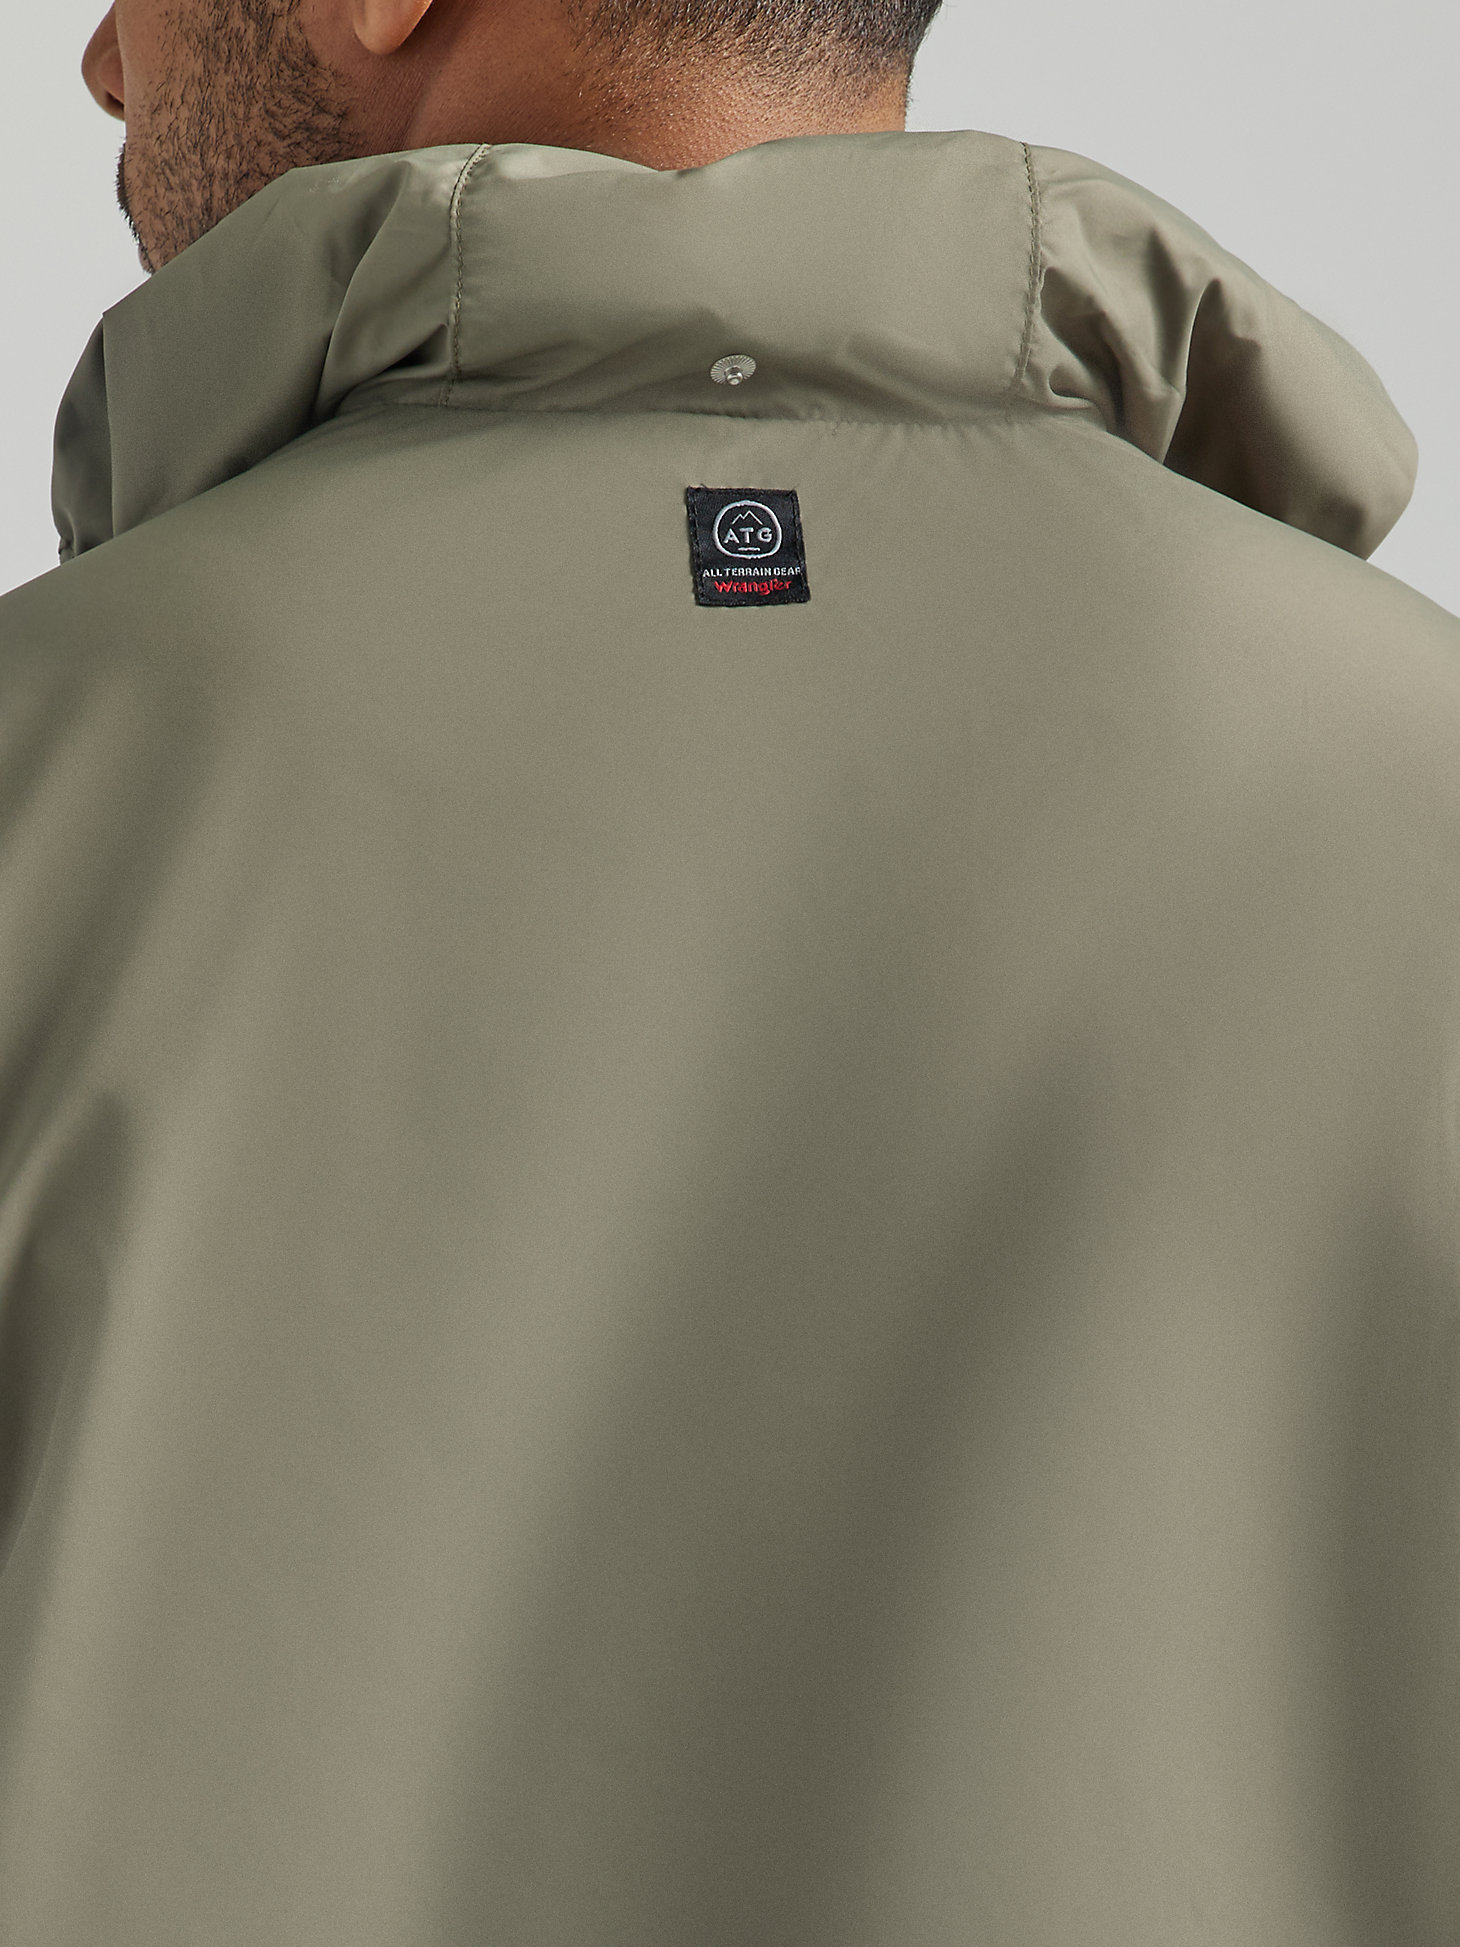 Lightweight Packable Jacket in Dusty Olive alternative view 4